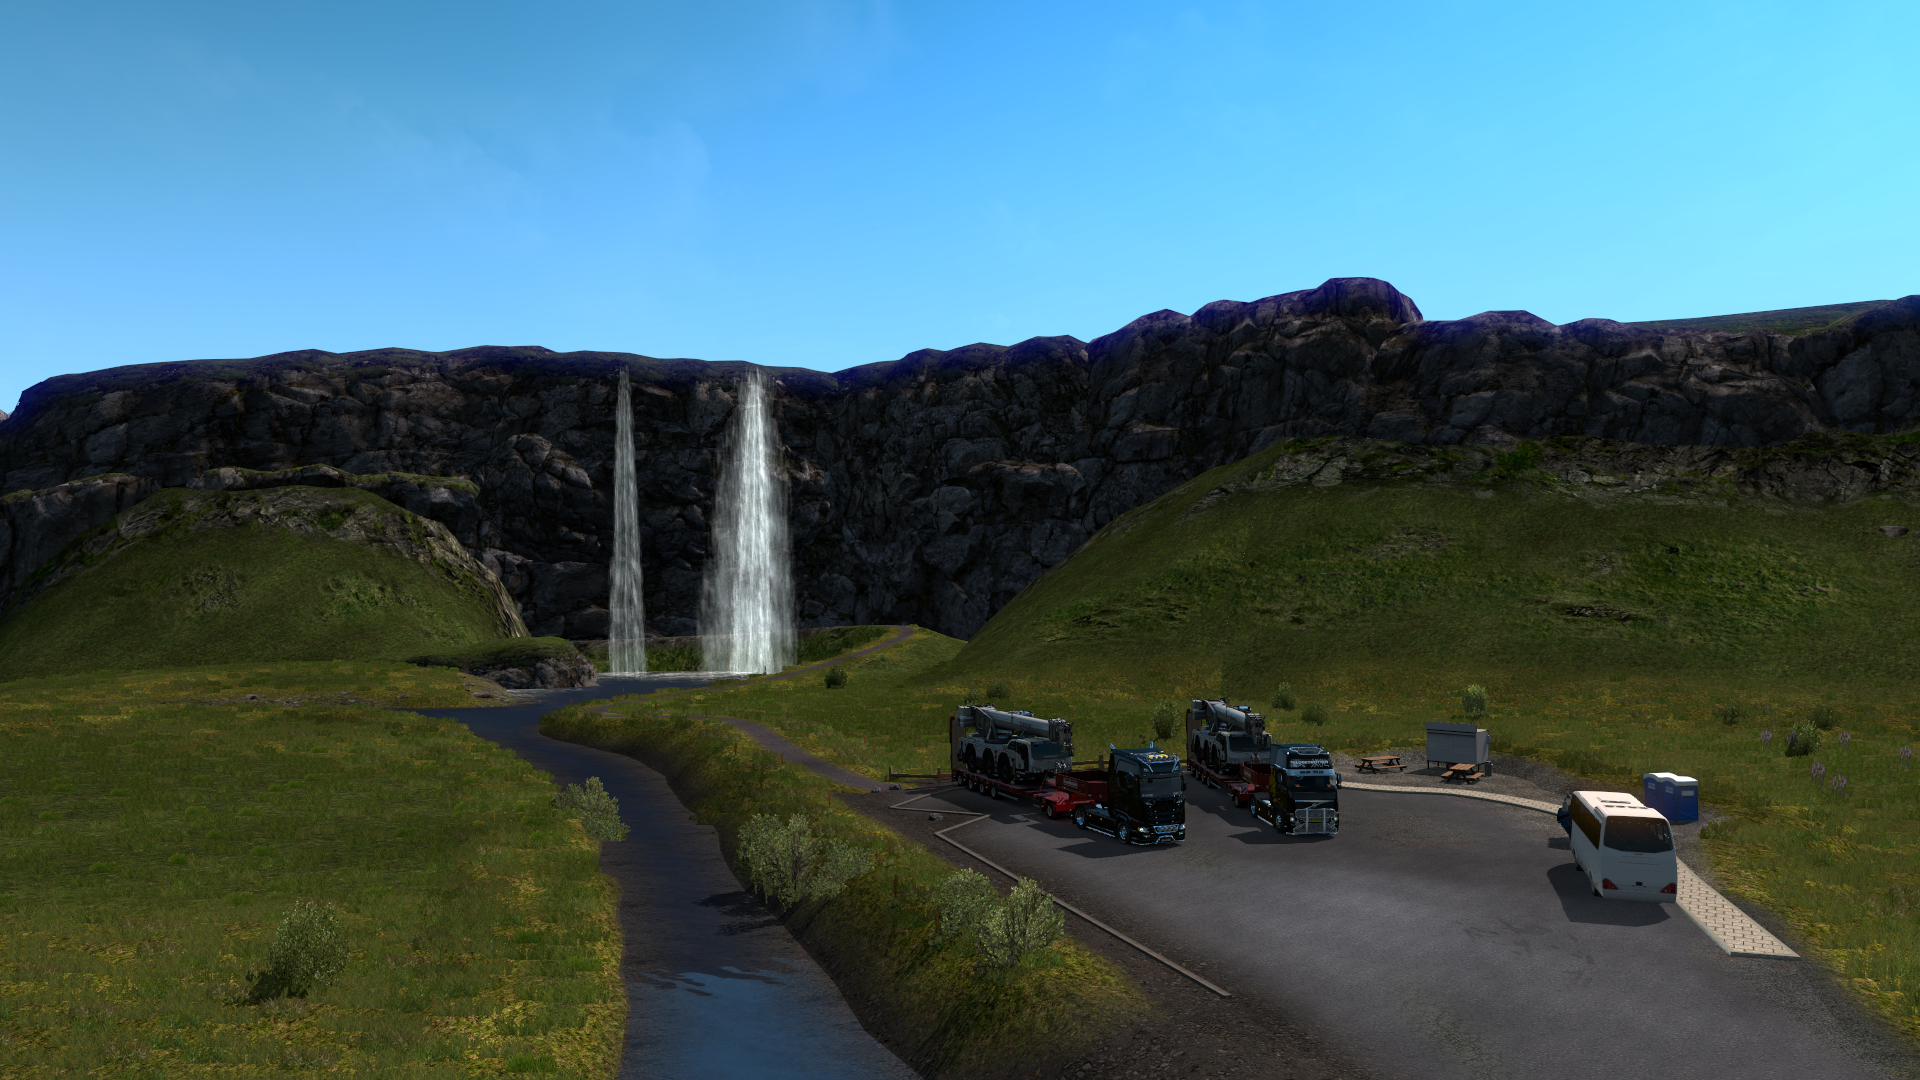 ets2_20200223_122901_00.png